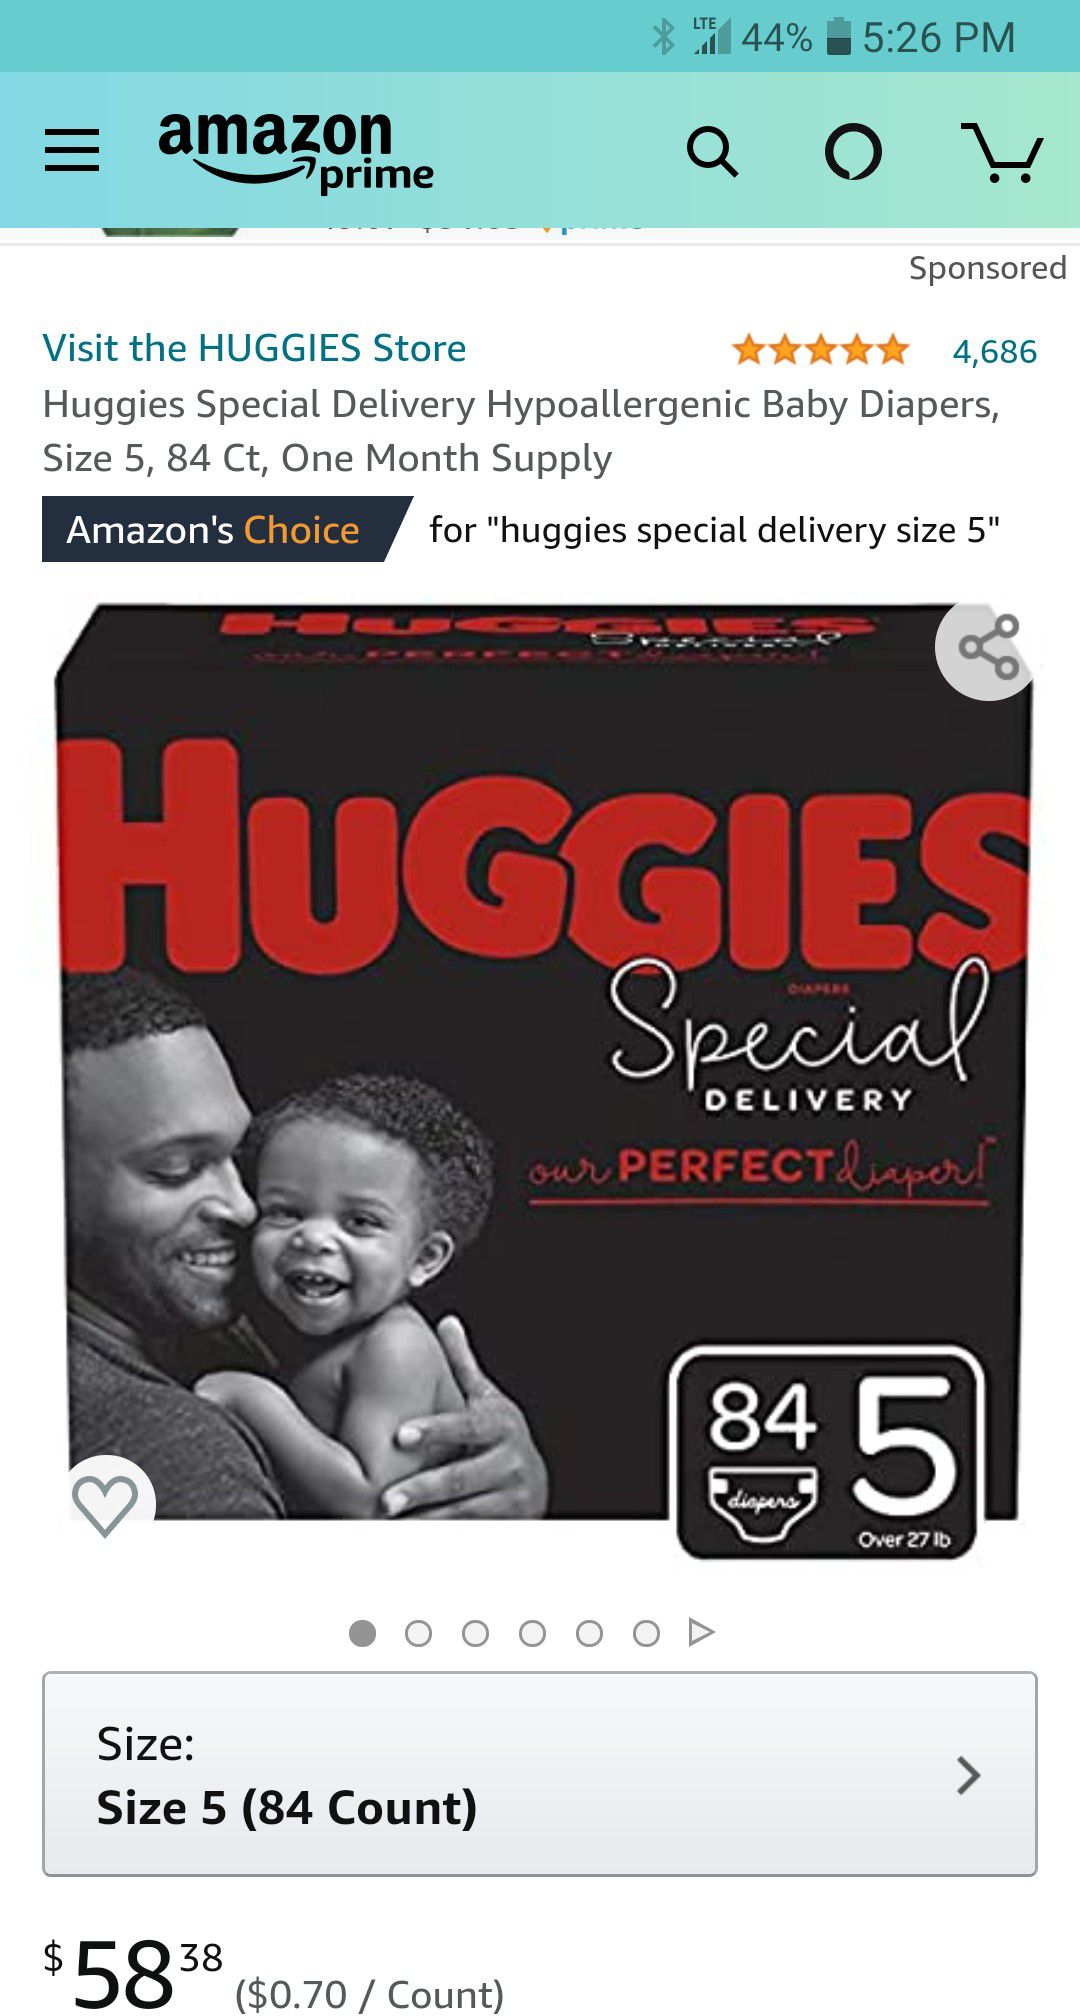 Huggies Specials 84 count (1in stocknw) Section Front Display